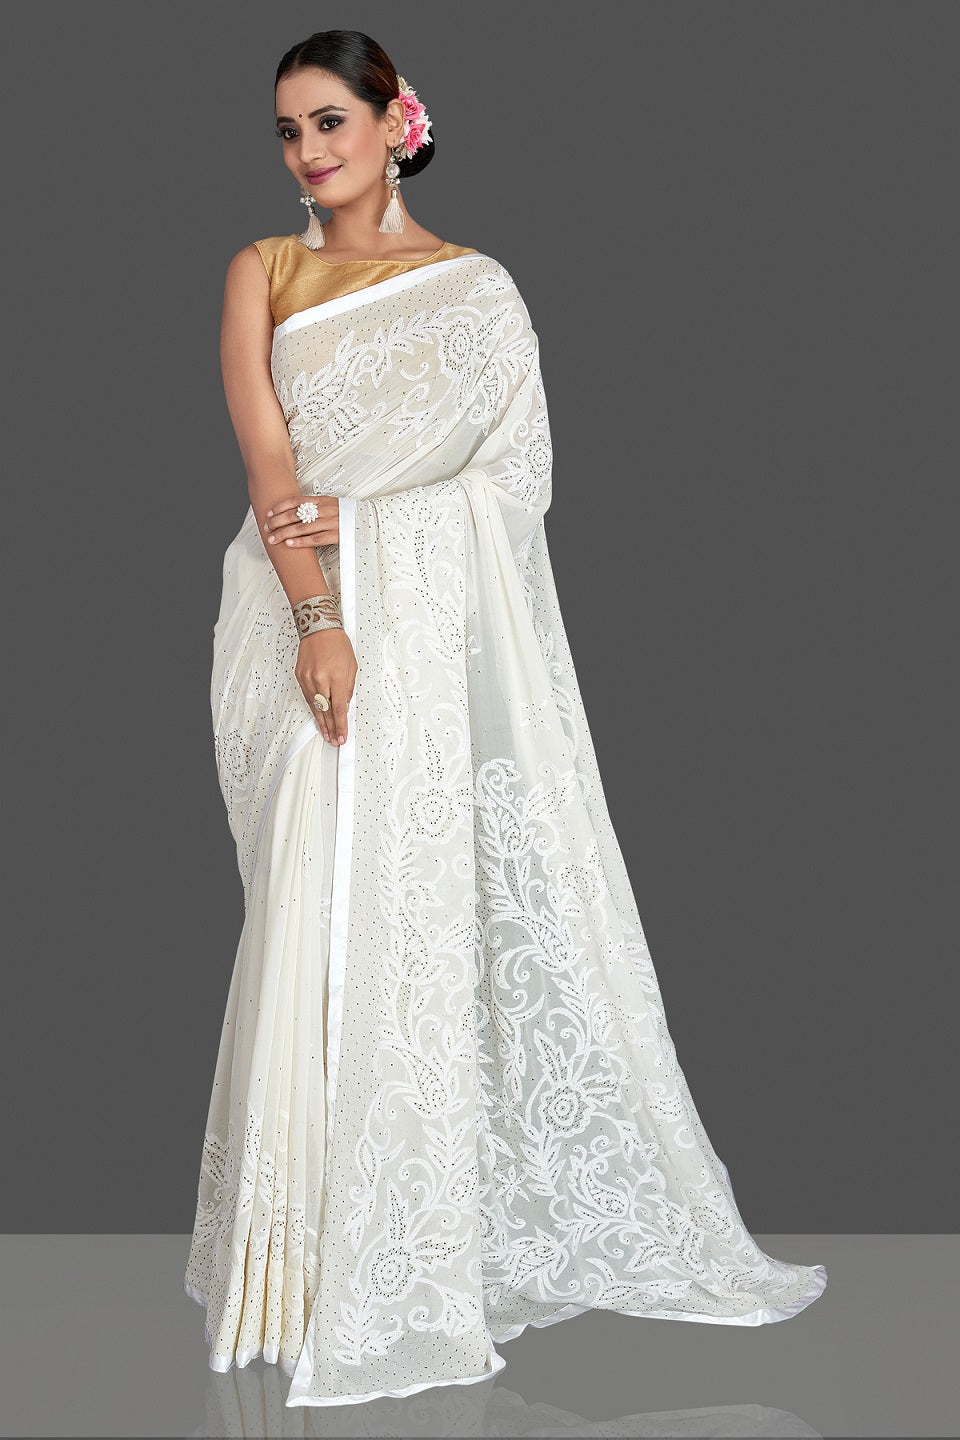 Buy stunning off-white Lucknowi chikankari georgette saree online in USA. Flaunt your sartorial choice with beautiful embroidered sarees, handwoven saris, georgette sarees, pure silk sarees from Pure Elegance Indian saree store in USA.-pallu